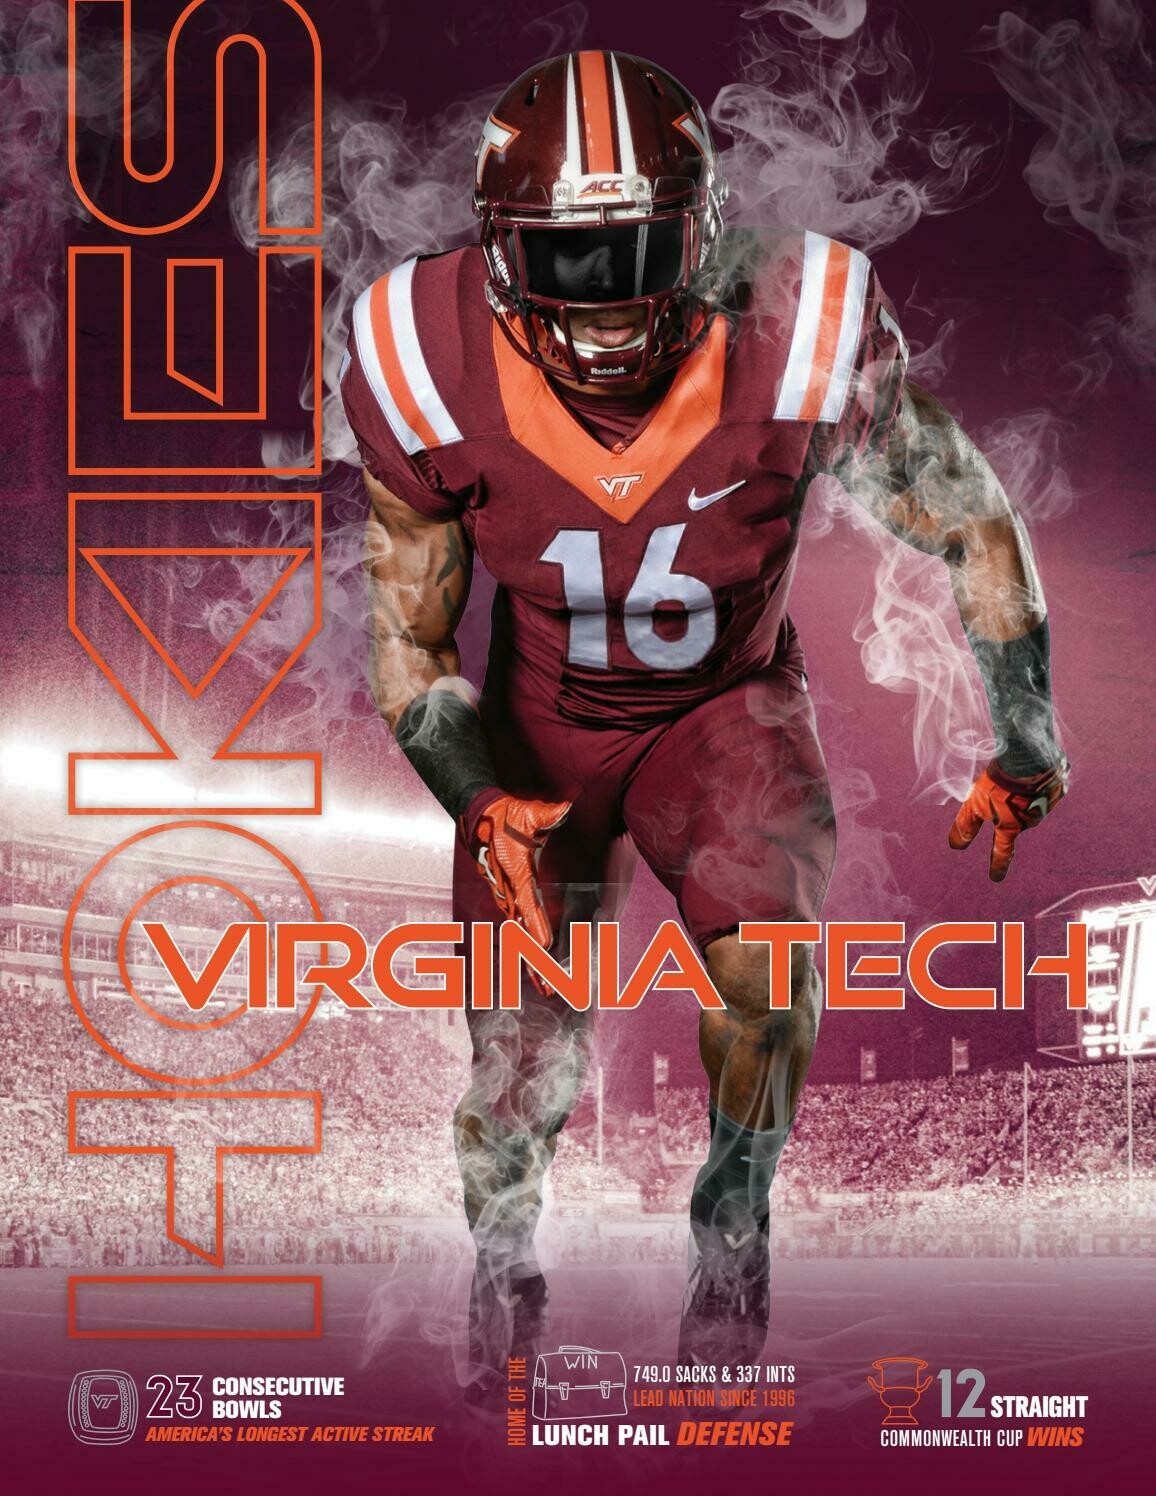 9/30/23 VT vs Pitt Ultimate Tailgate Package (INCLUDES PARKING)